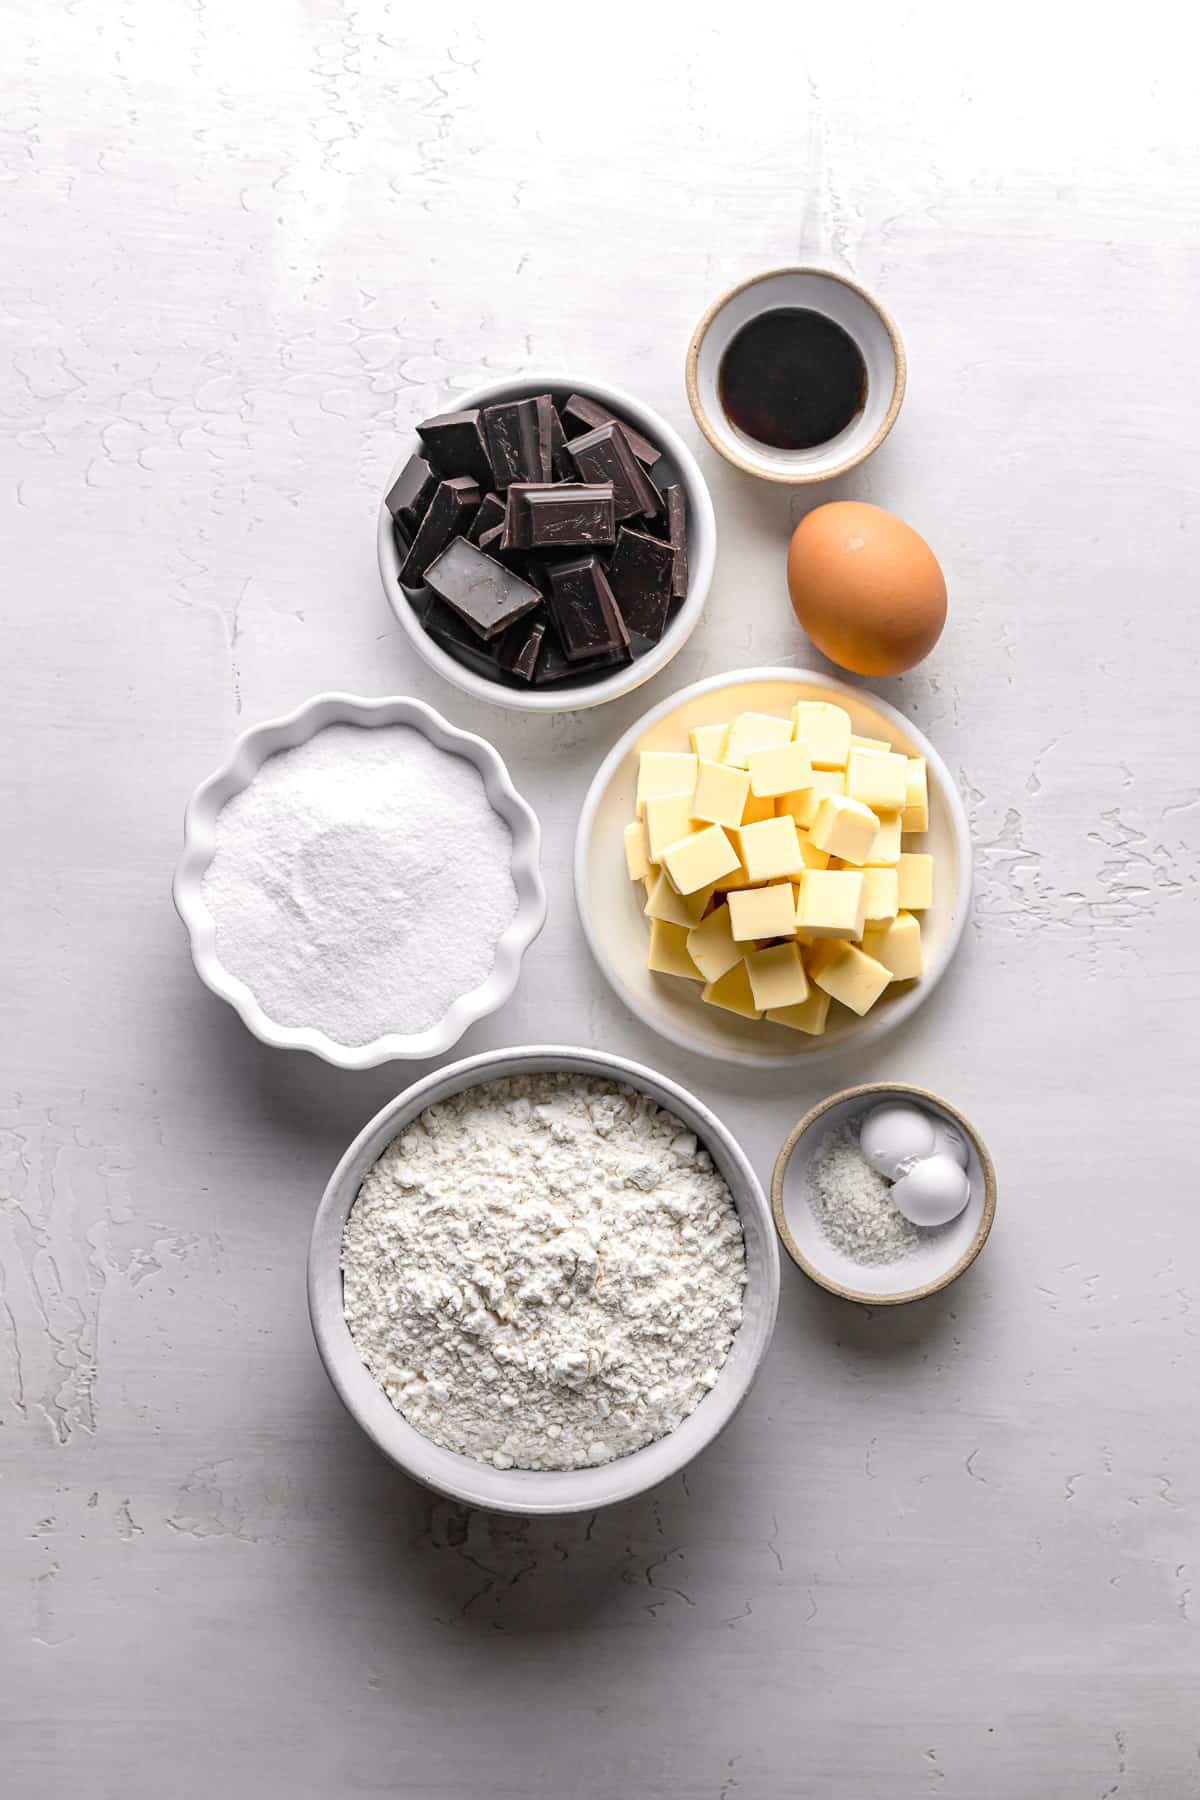 ingredients for chocolate chip cookies without brown sugar.